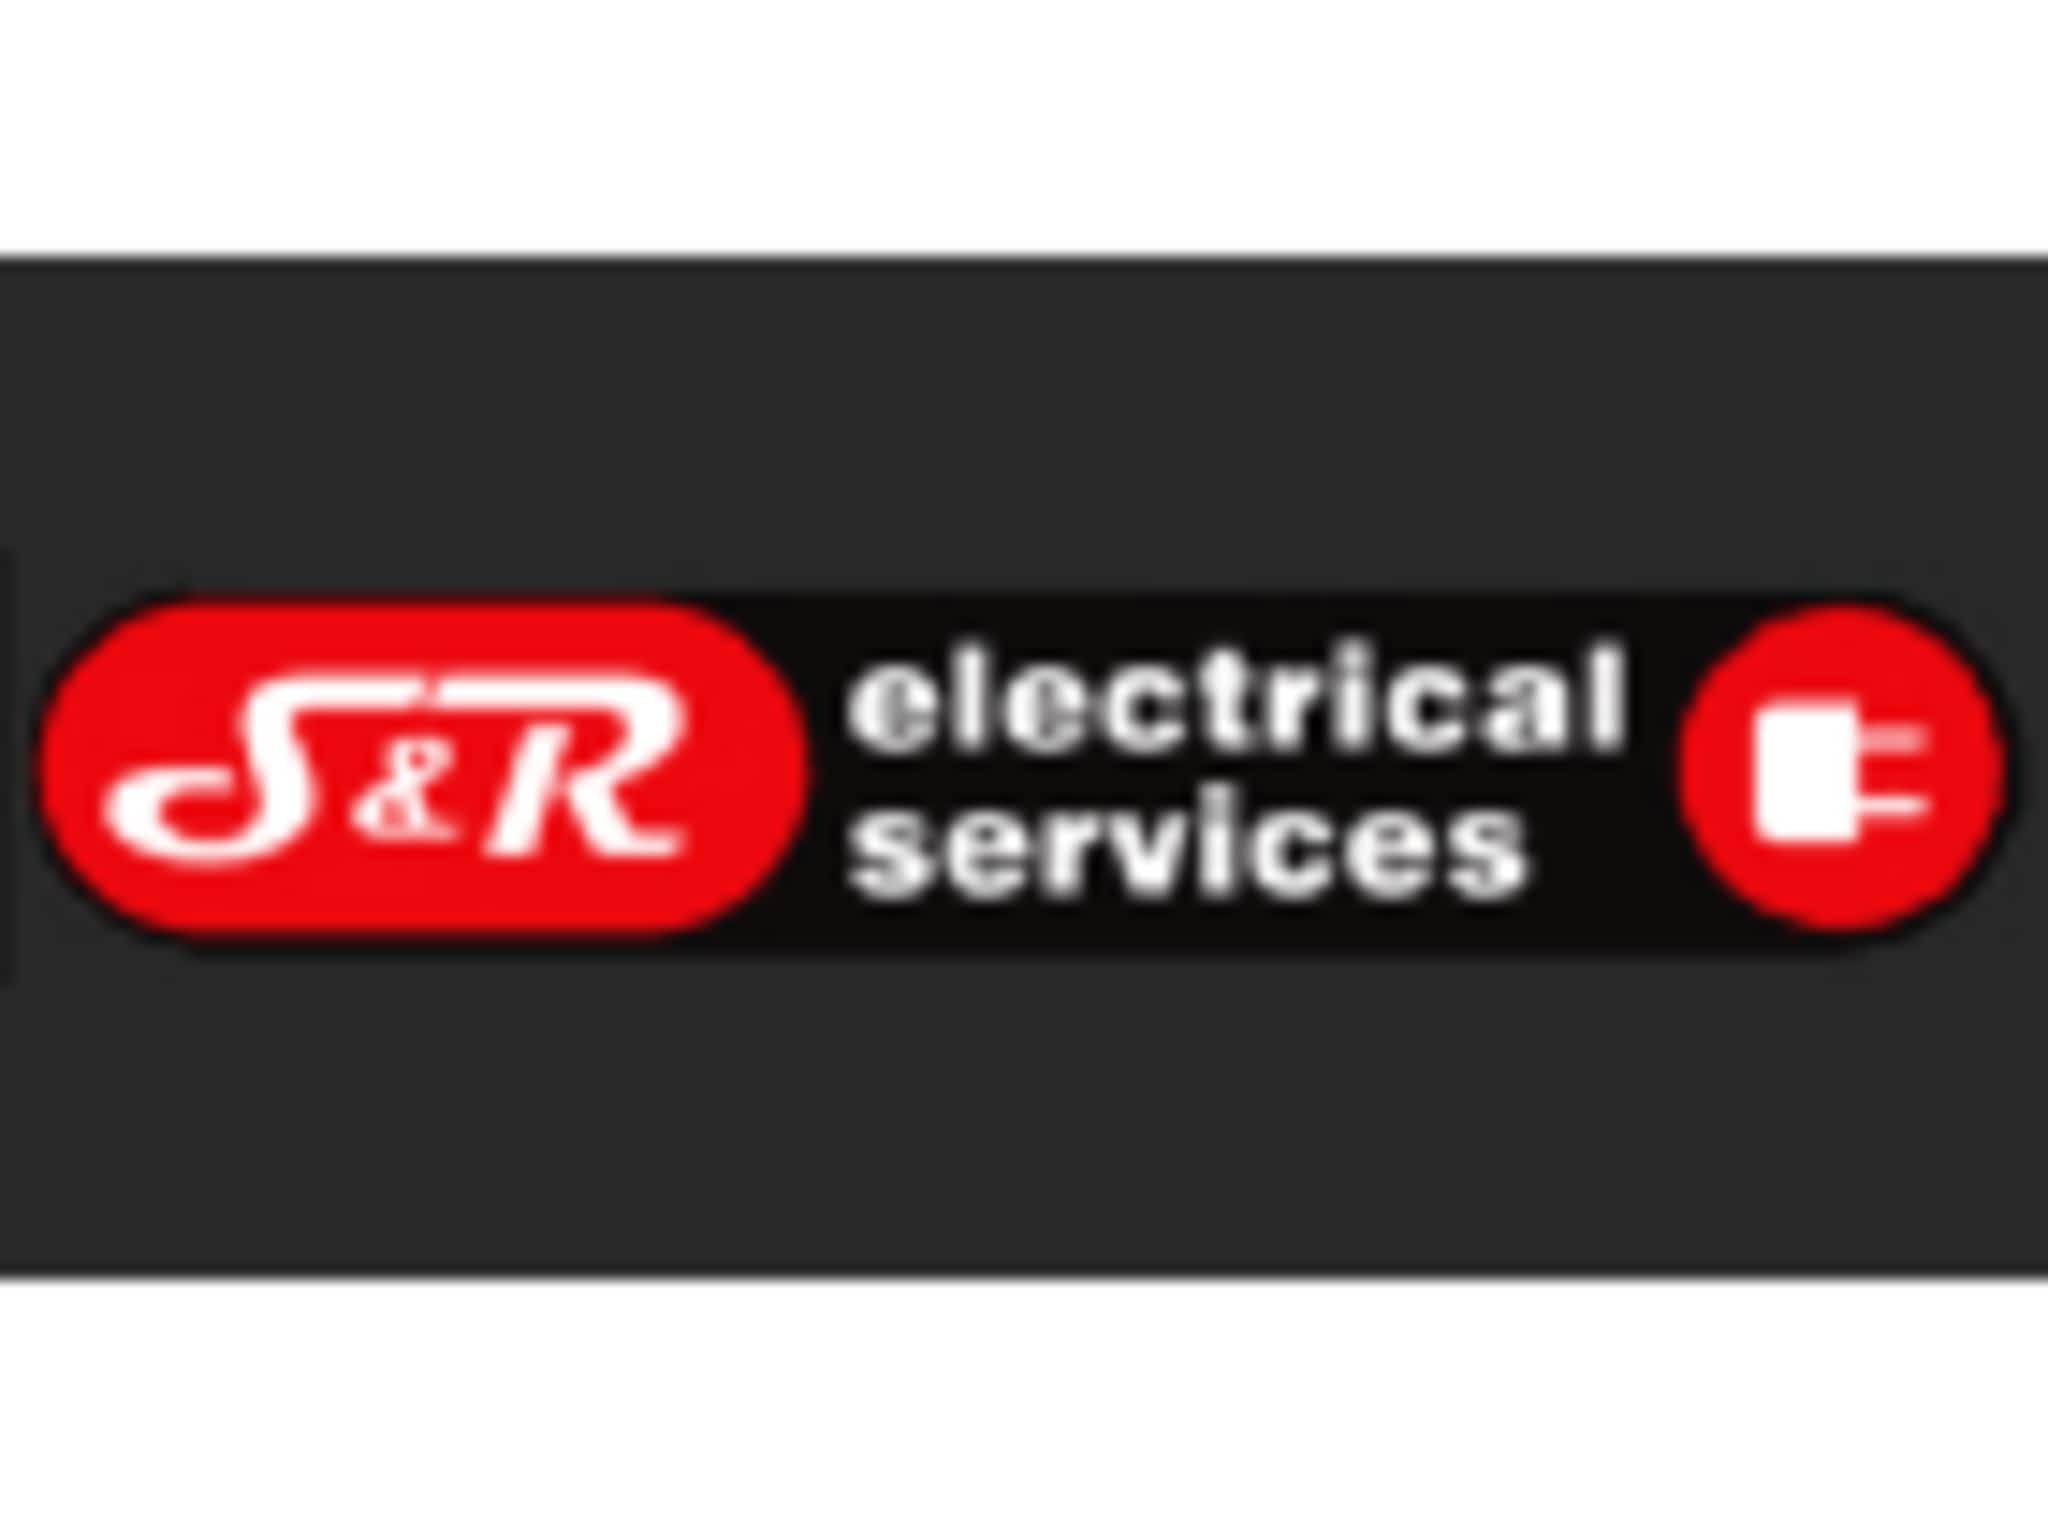 photo S&R Electrical Services